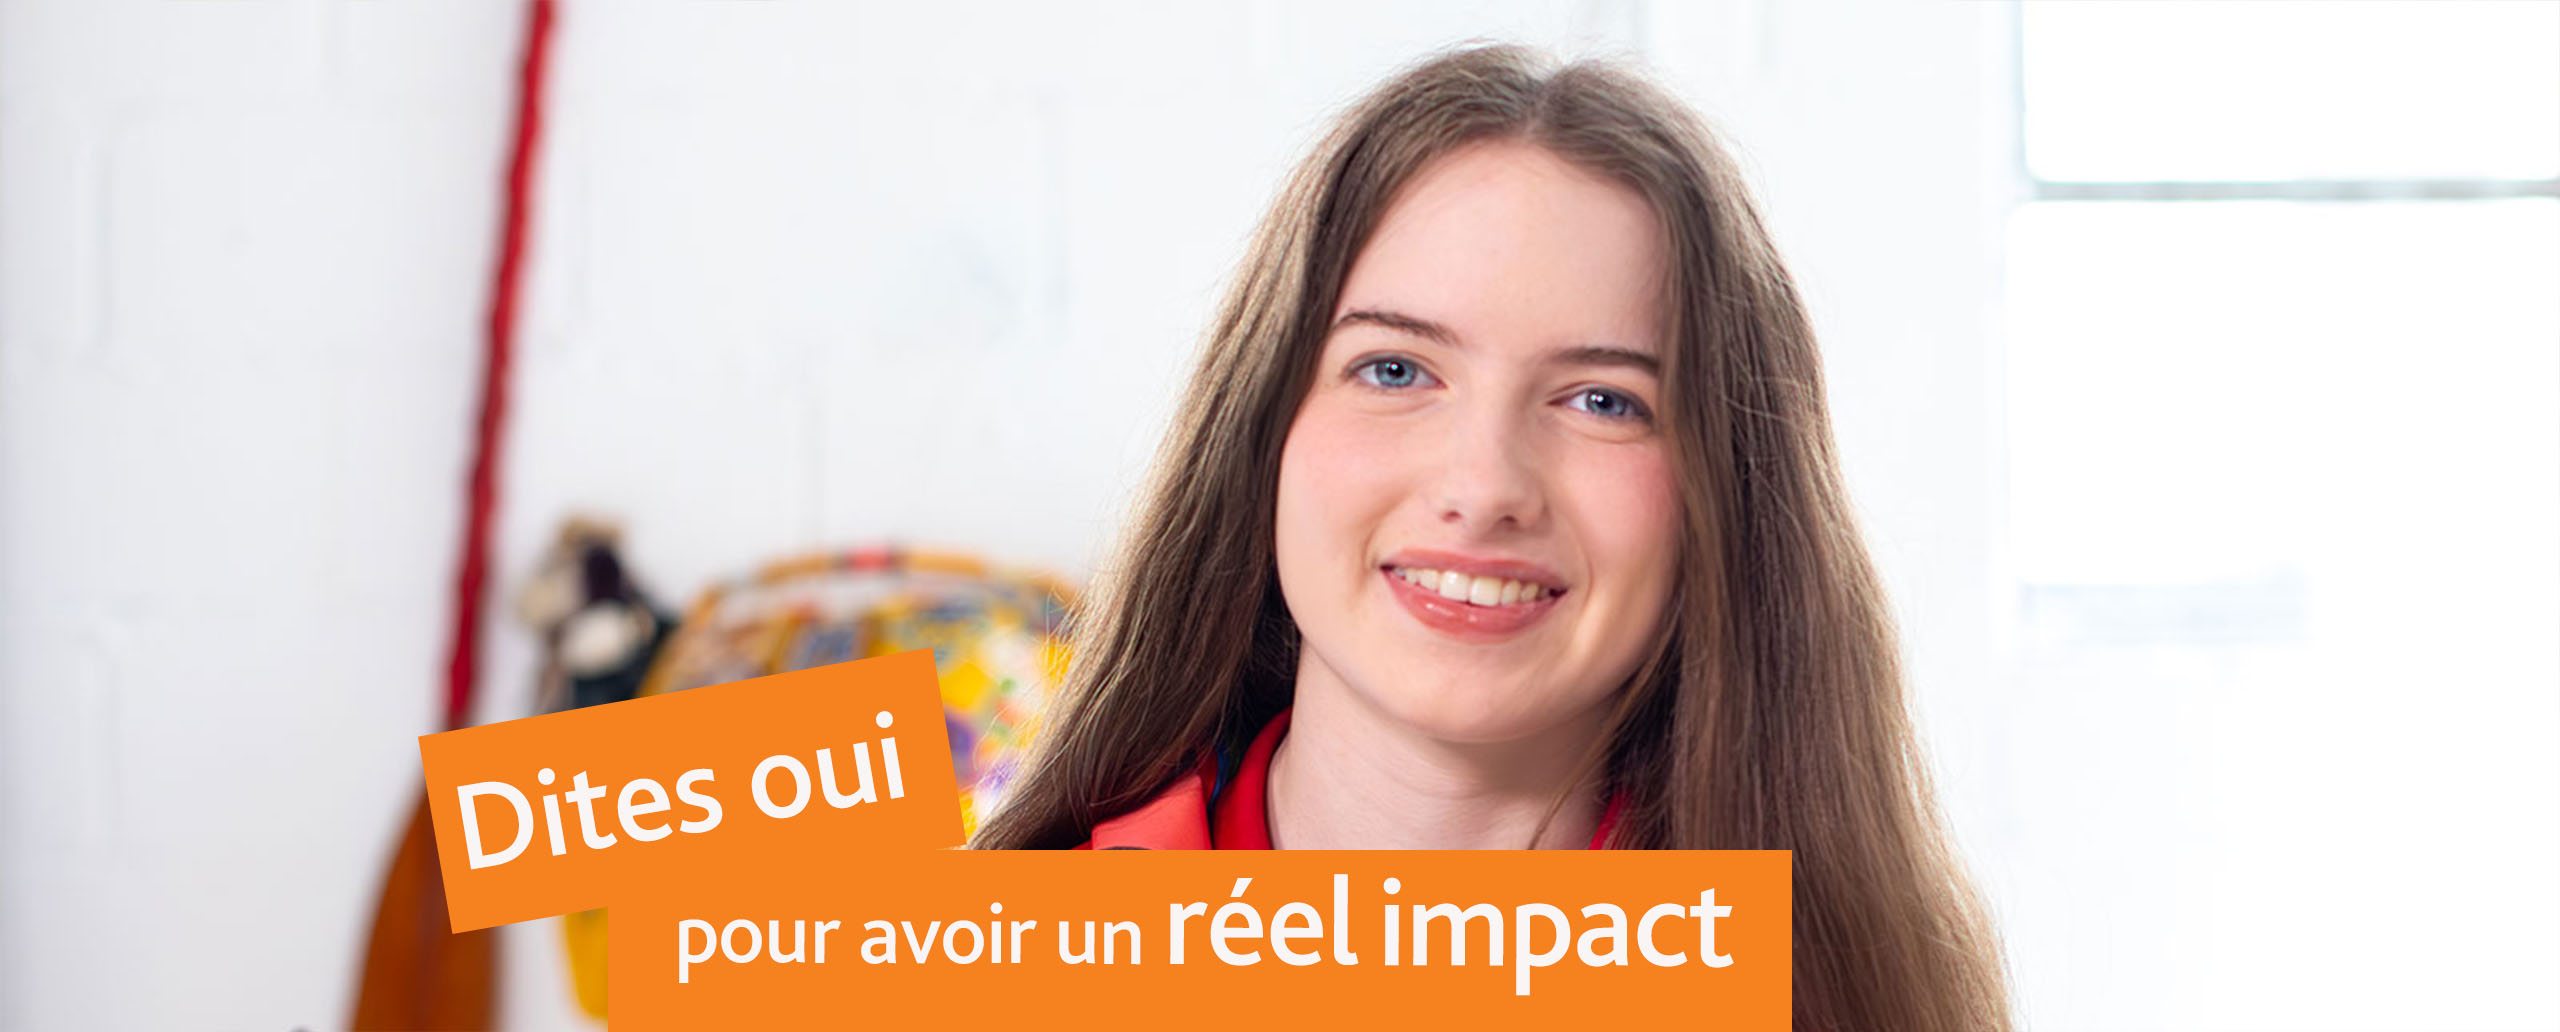 Say yes to making a real impact